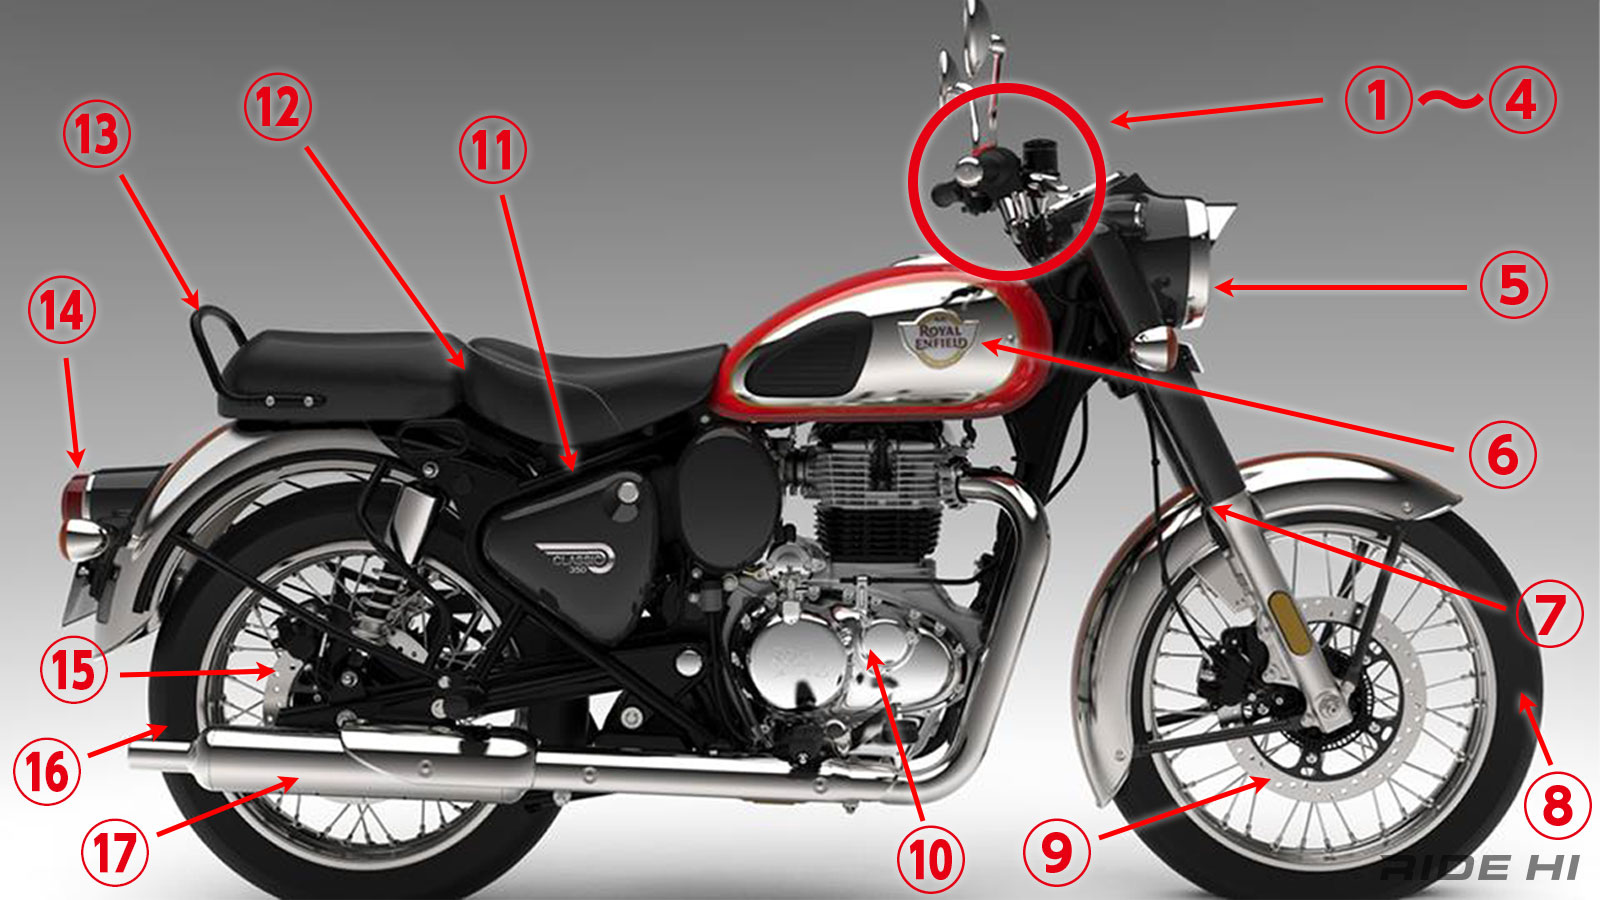 royalenfield_classic350_220210_14